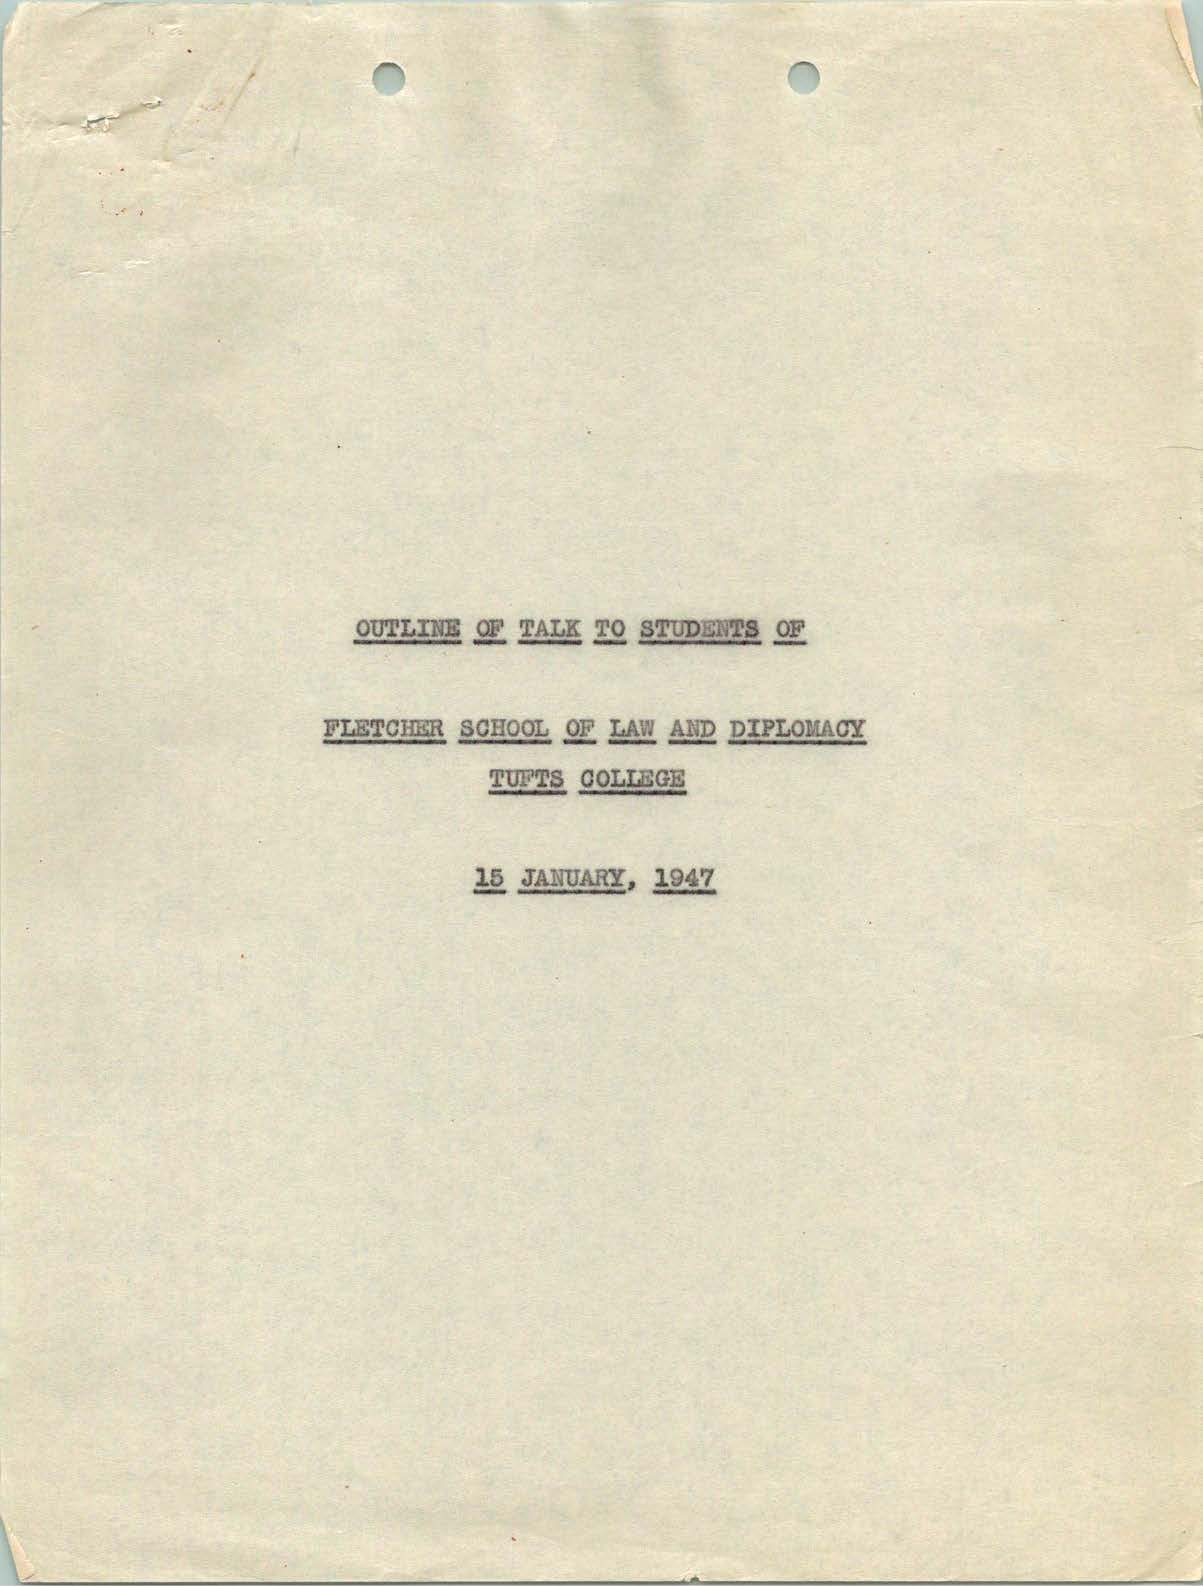 Outline of talk to students of Fletcher School of Law and Diplomacy, by Raymond A. Spruance